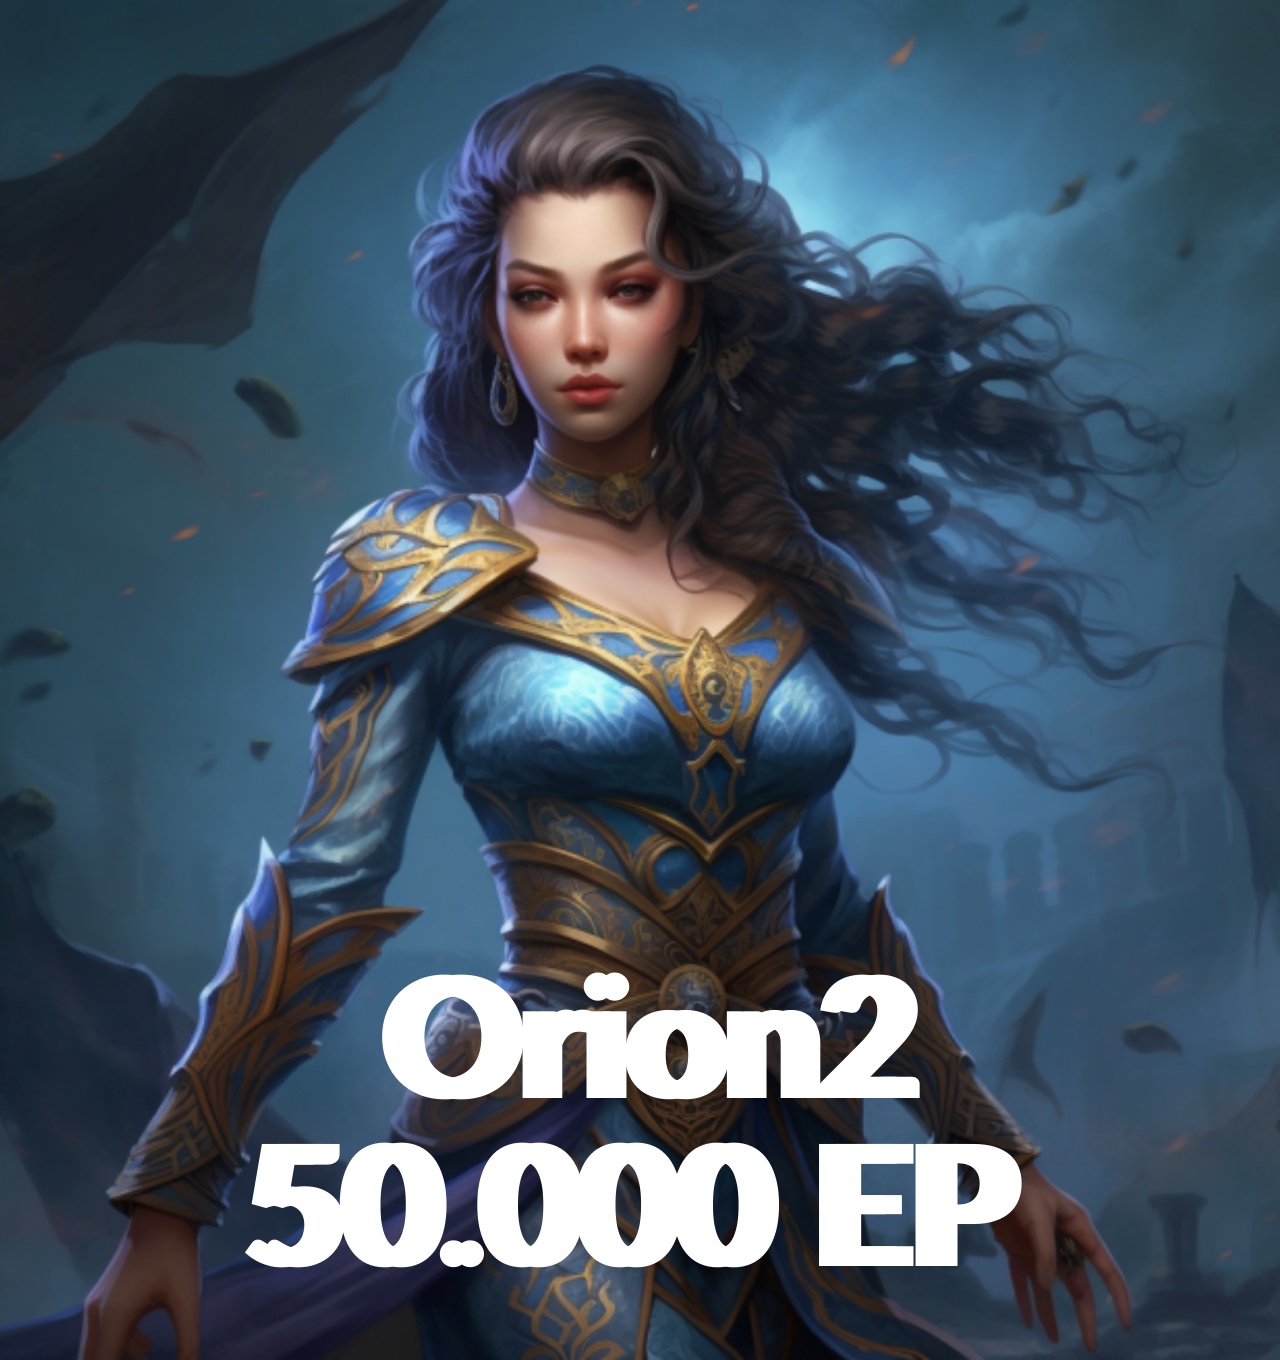 Orion2 50.000 EP